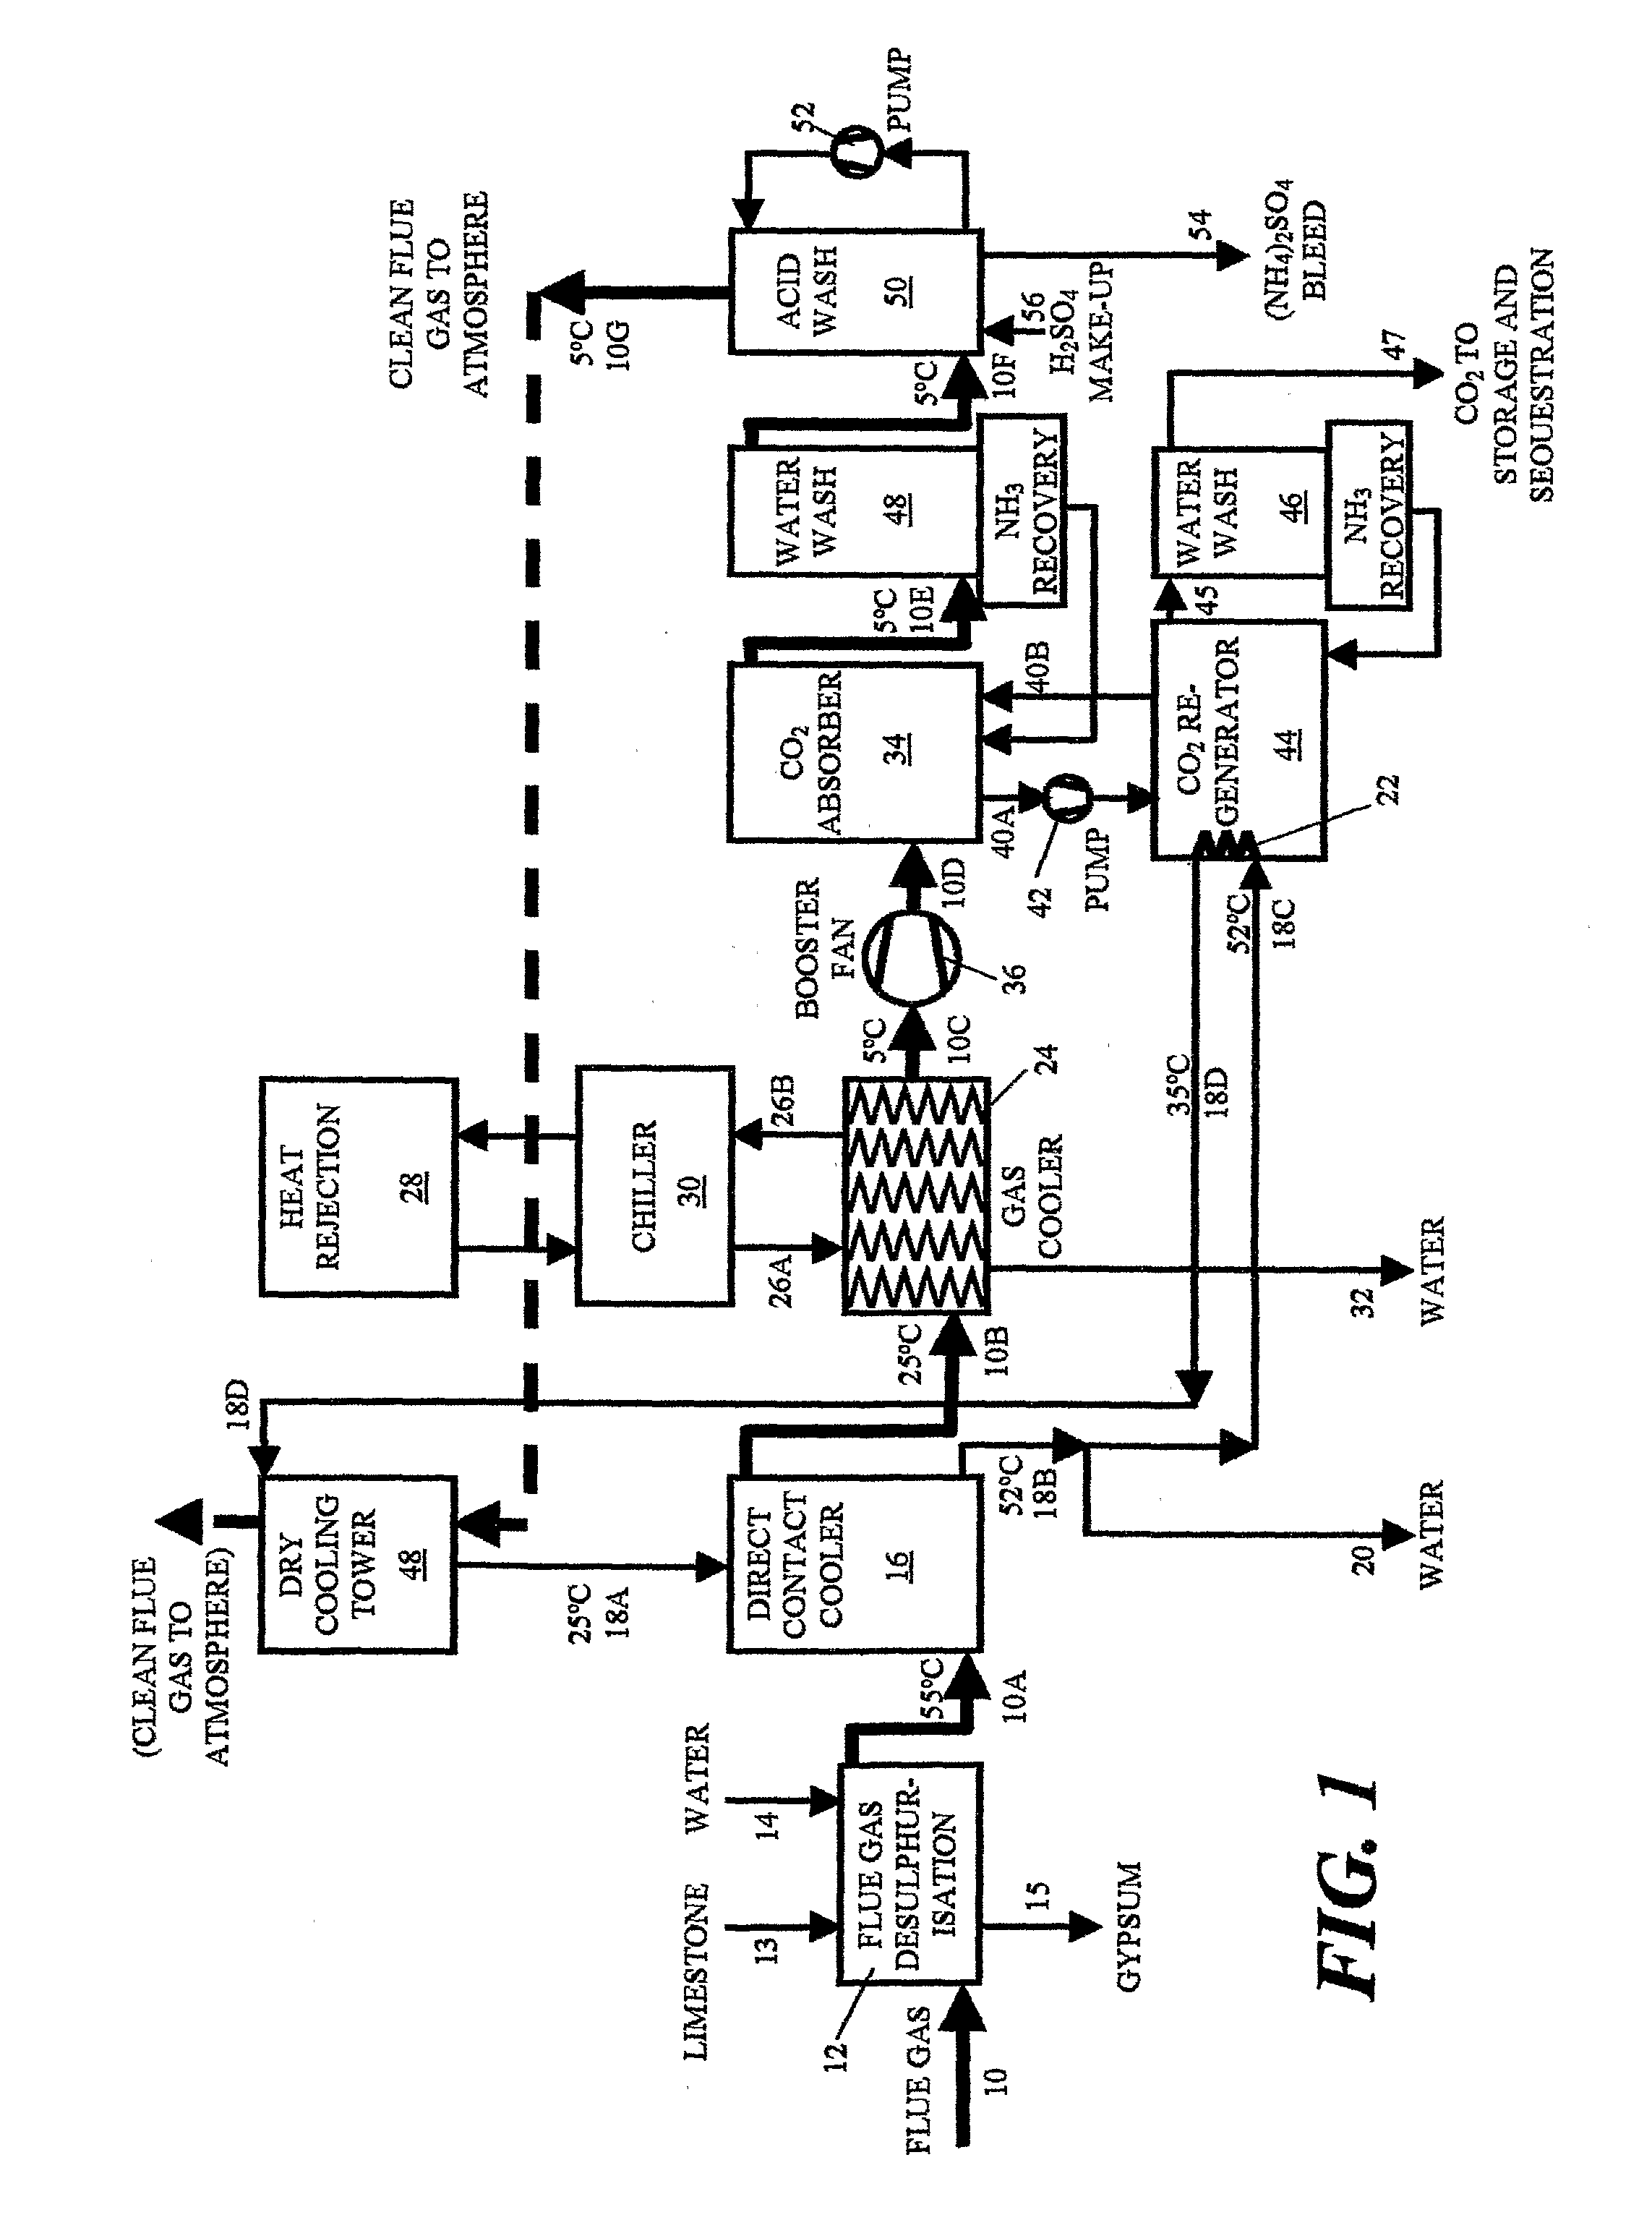 Carbon capture system and process